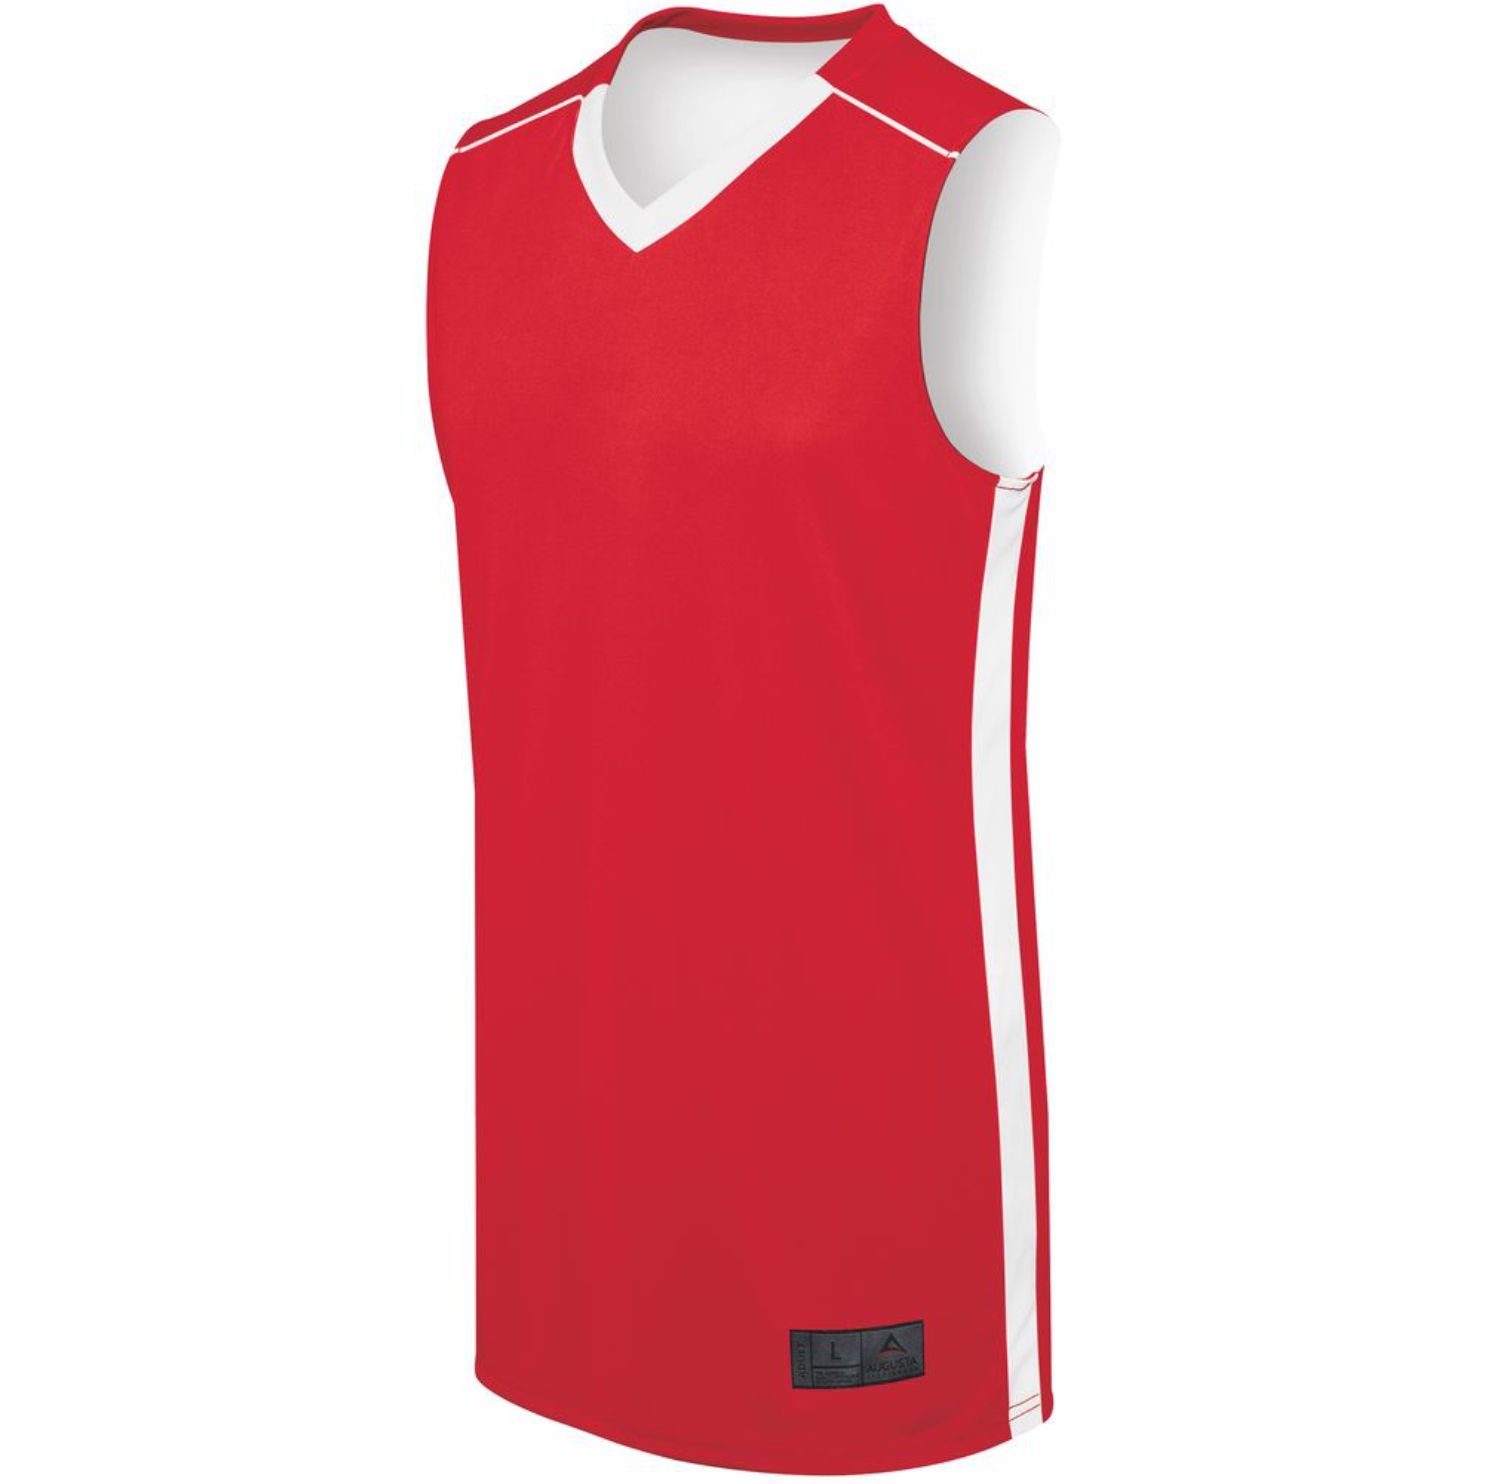 Augusta Sportswear Adult Competition Reversible Jersey #332400 Red / White